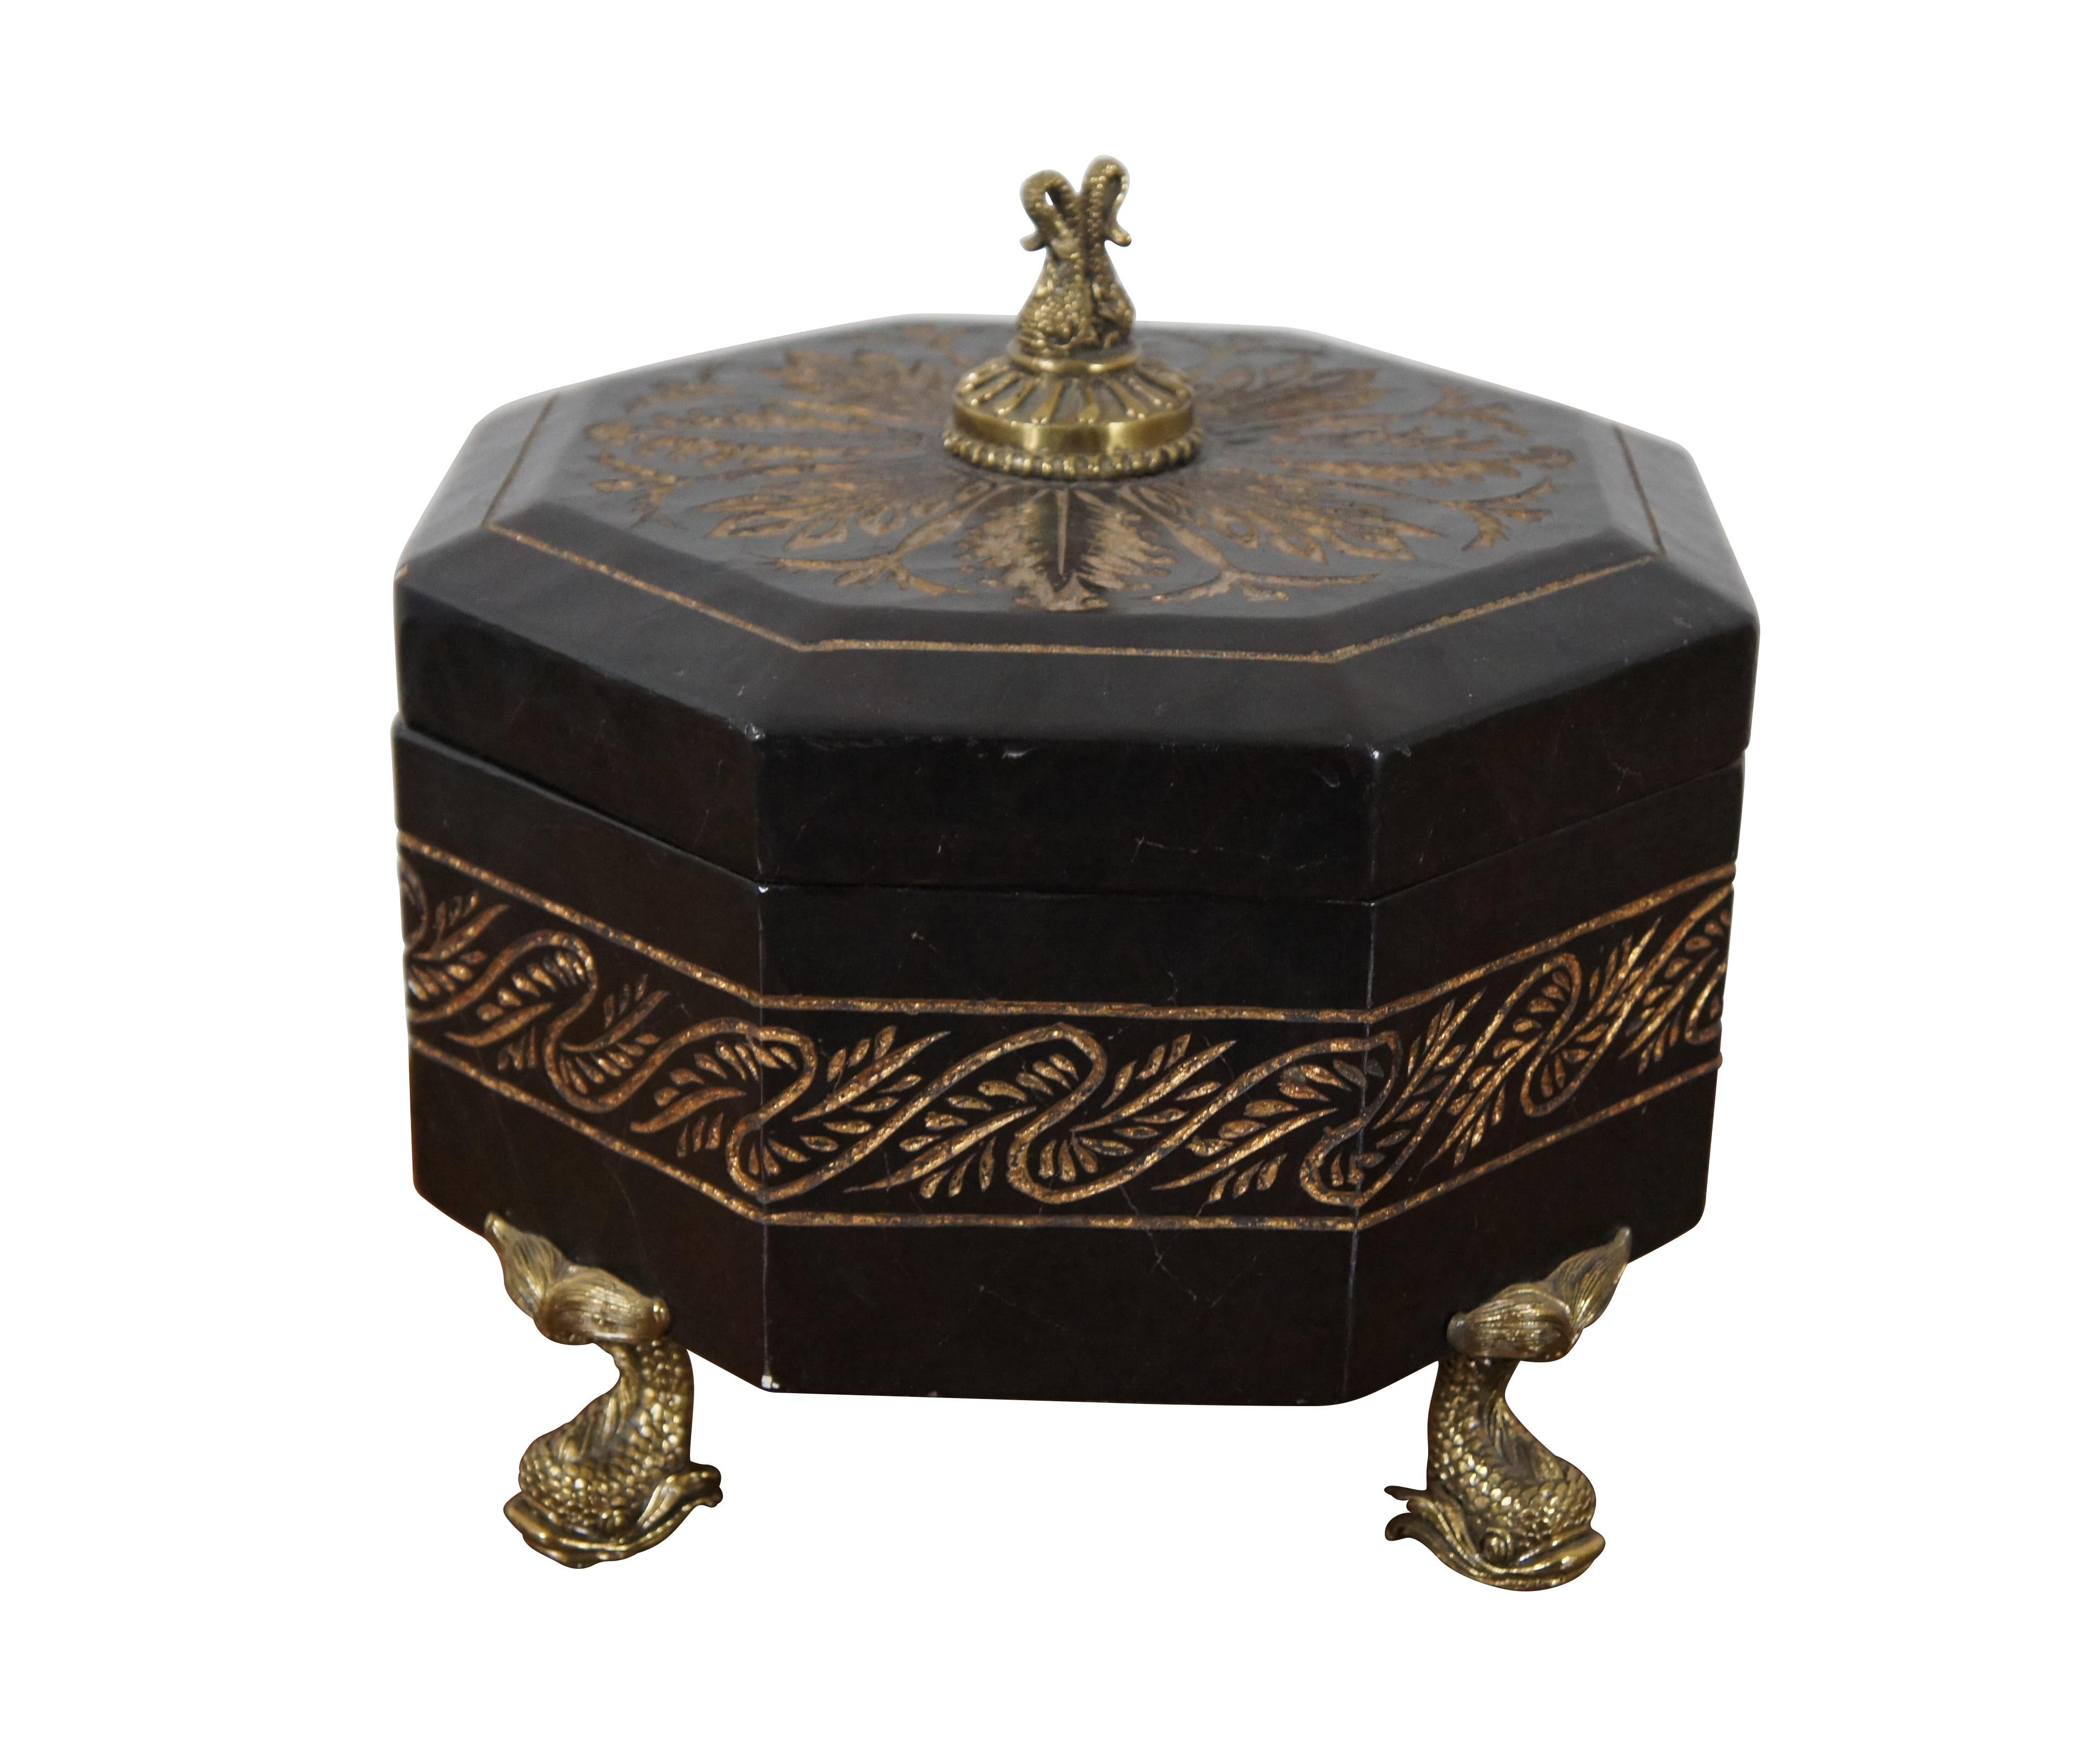 Vintage octagonal keepsake box, finished in black lacquer with engraved foliate designs painted with gold, supported by four gold / brass delphin / dolphin / fish shaped feet, and a matching double delphin finial on the lid.

Dimensions:
11.25” x